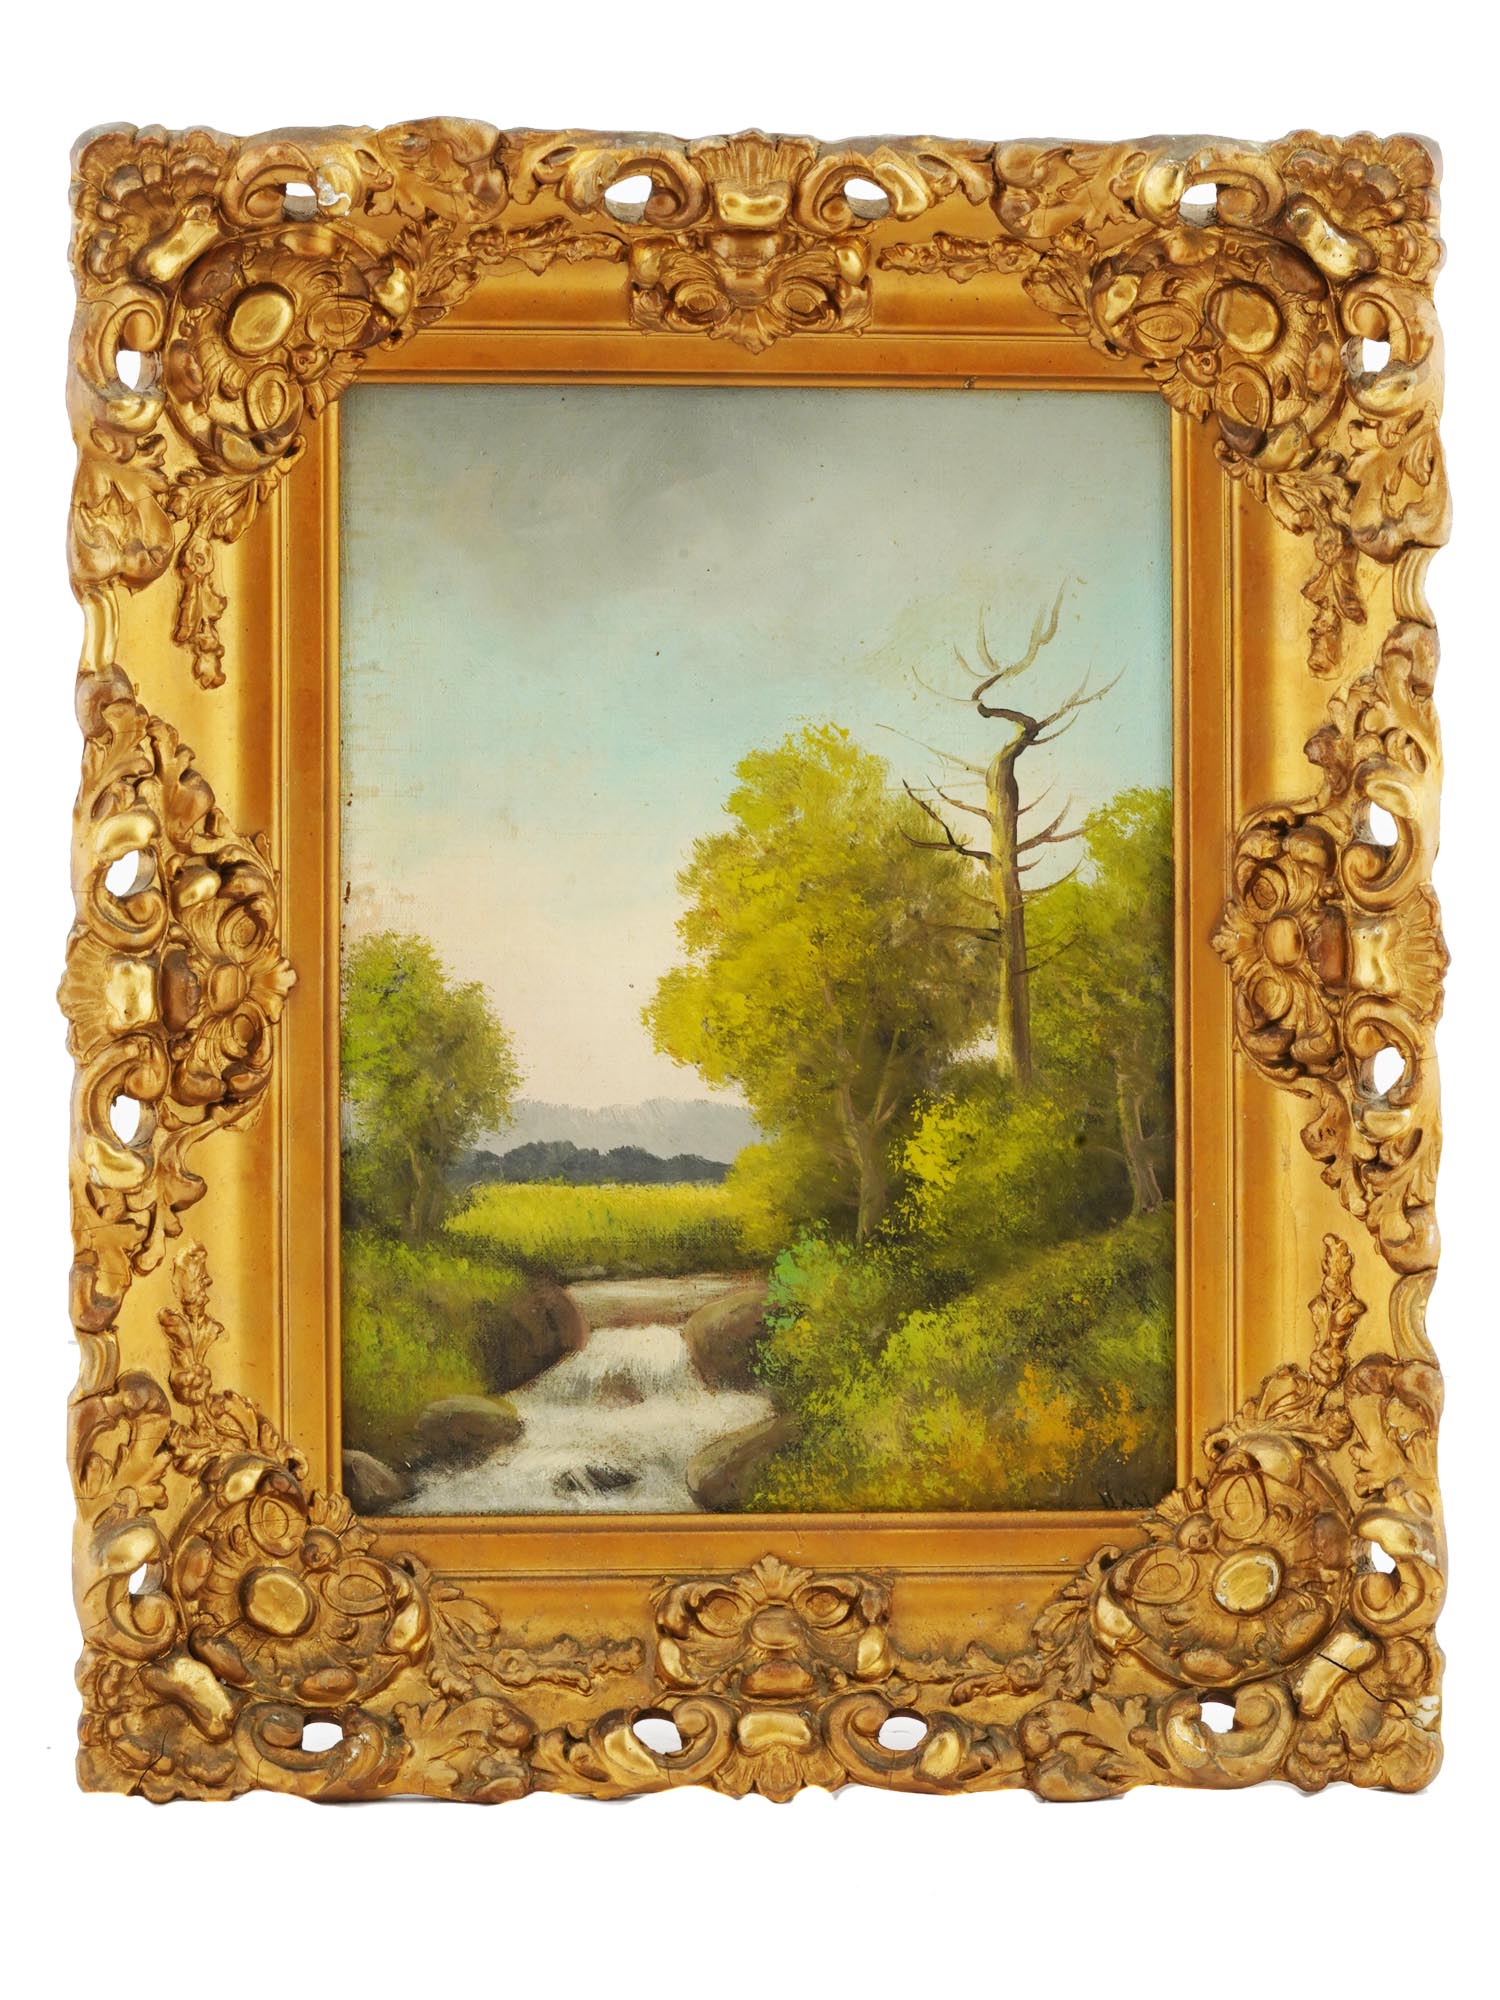 SIGNED OIL ON CANVAS LANDSCAPE PAINTING W RIVER PIC-0